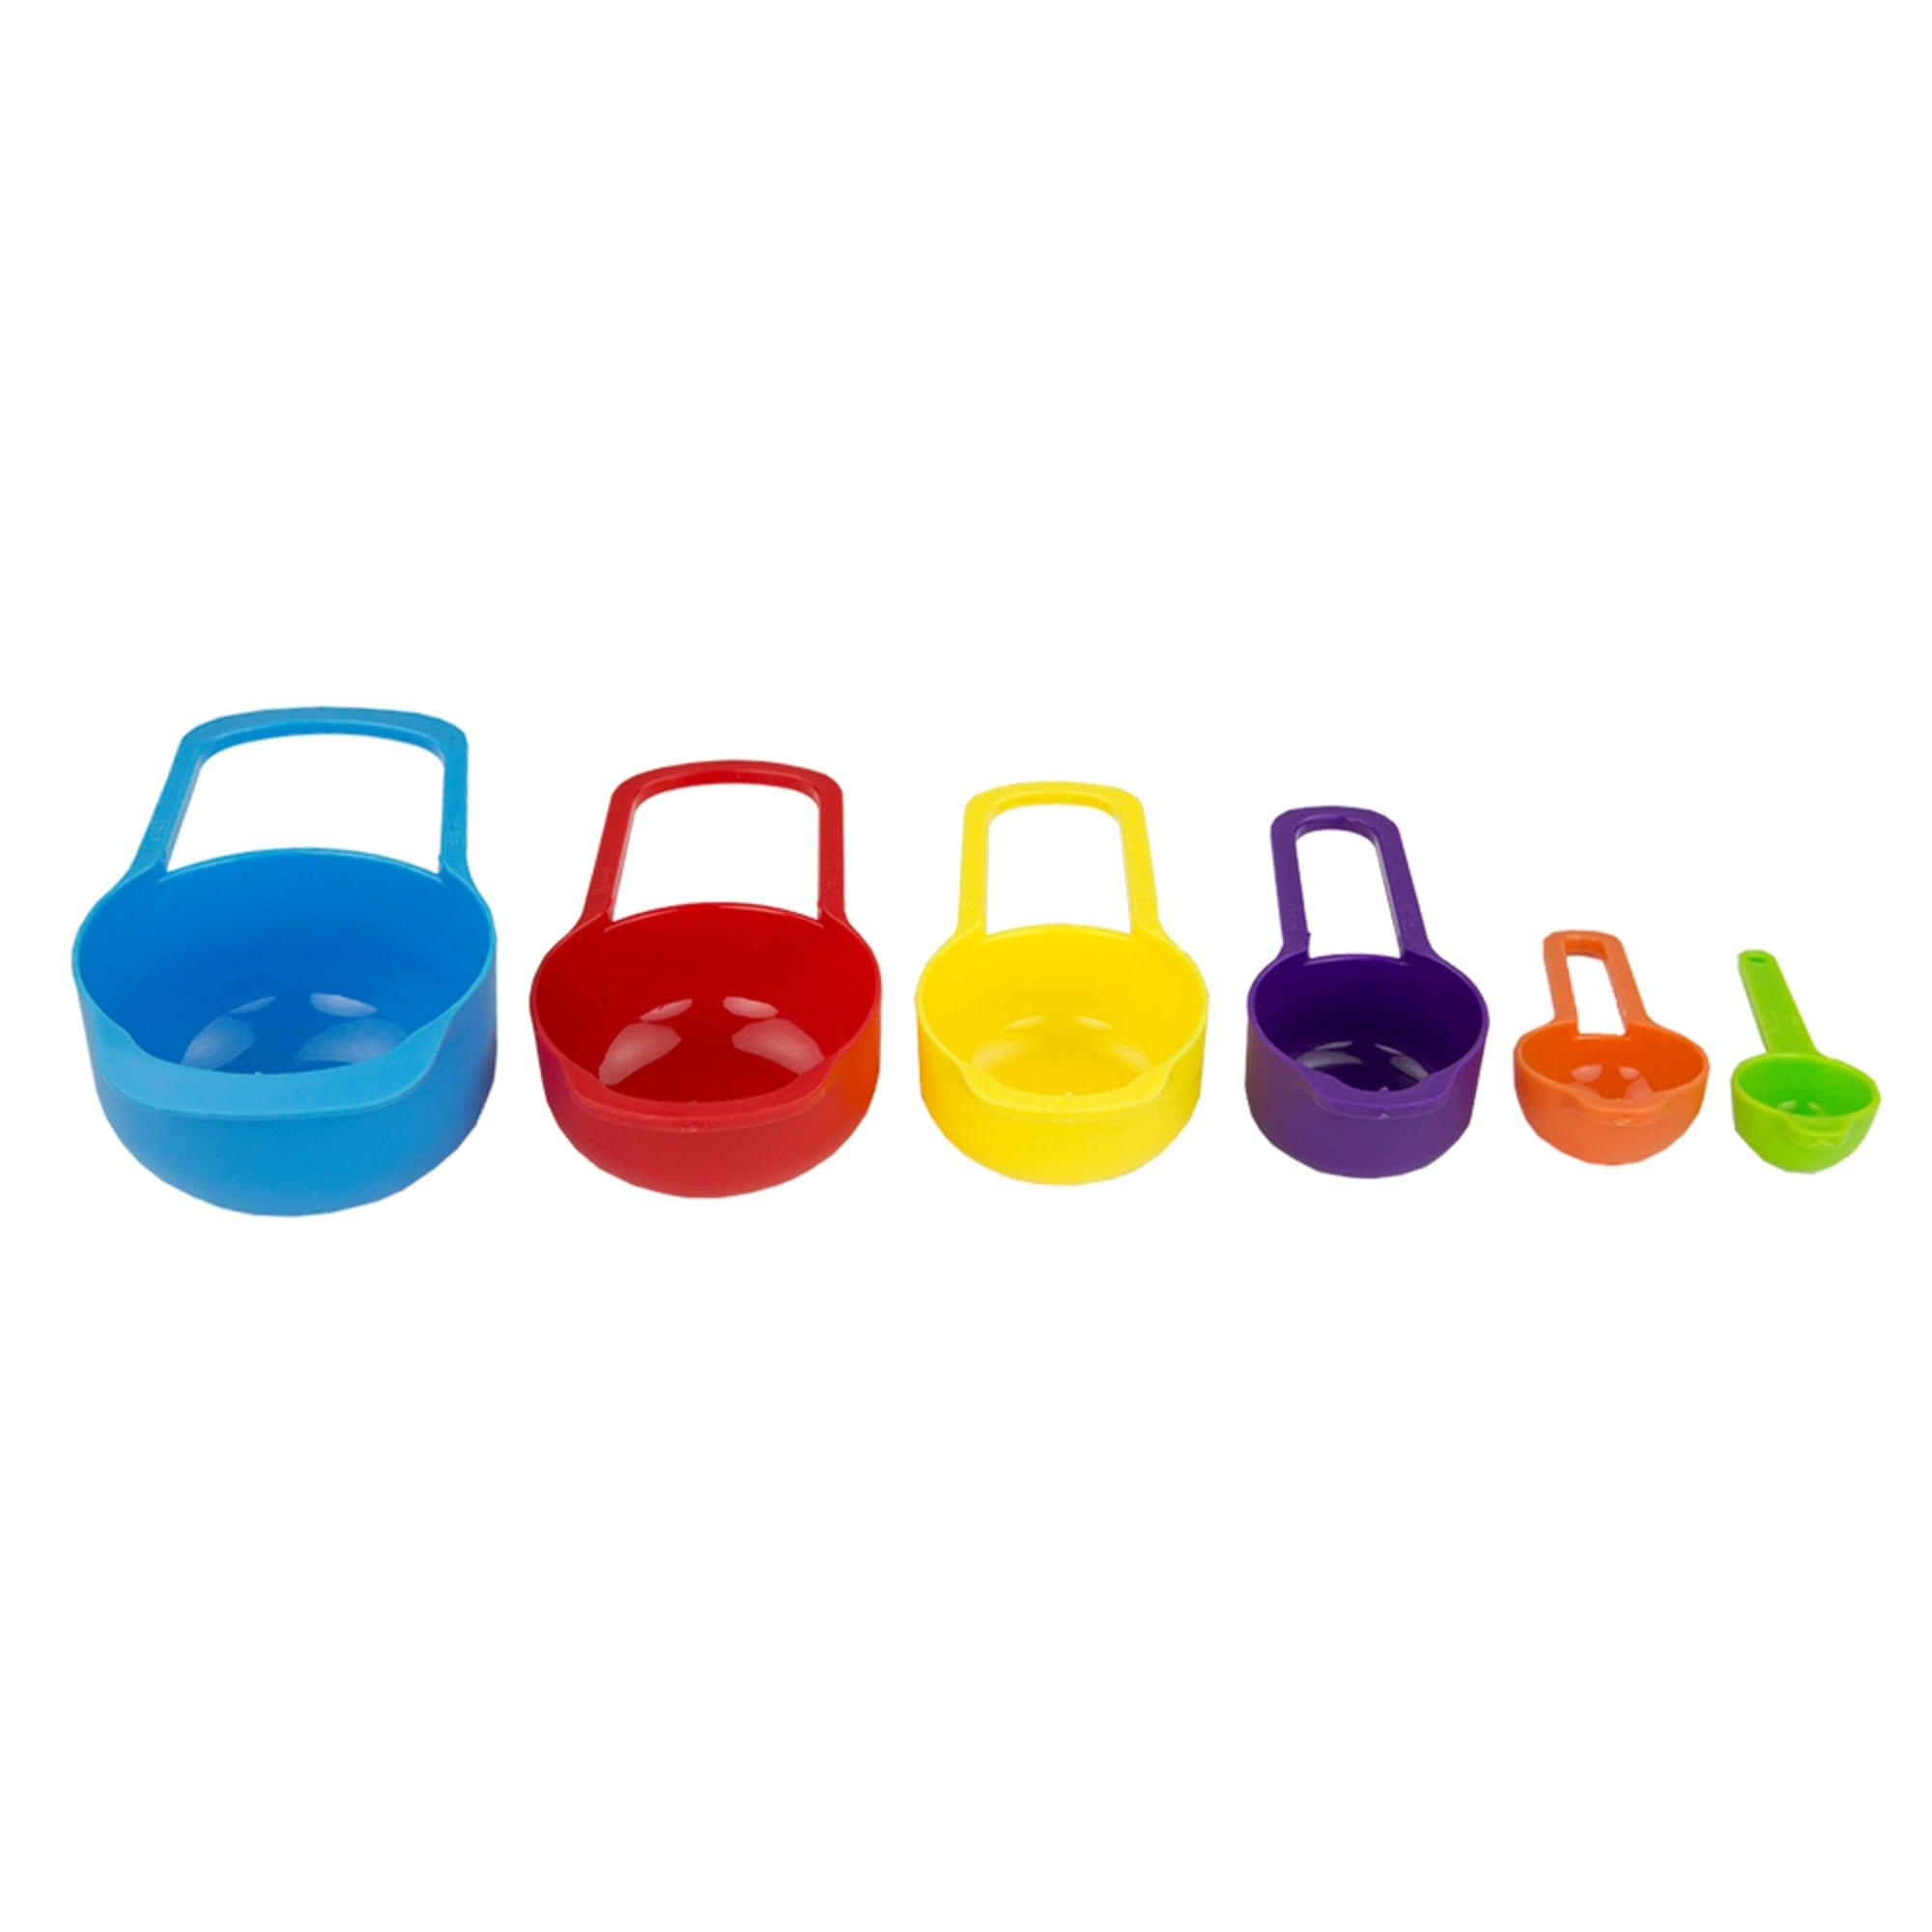 Home Basics 6 Piece Plastic Measuring Cup Set, Multi-Colored $2.00 EACH, CASE PACK OF 24